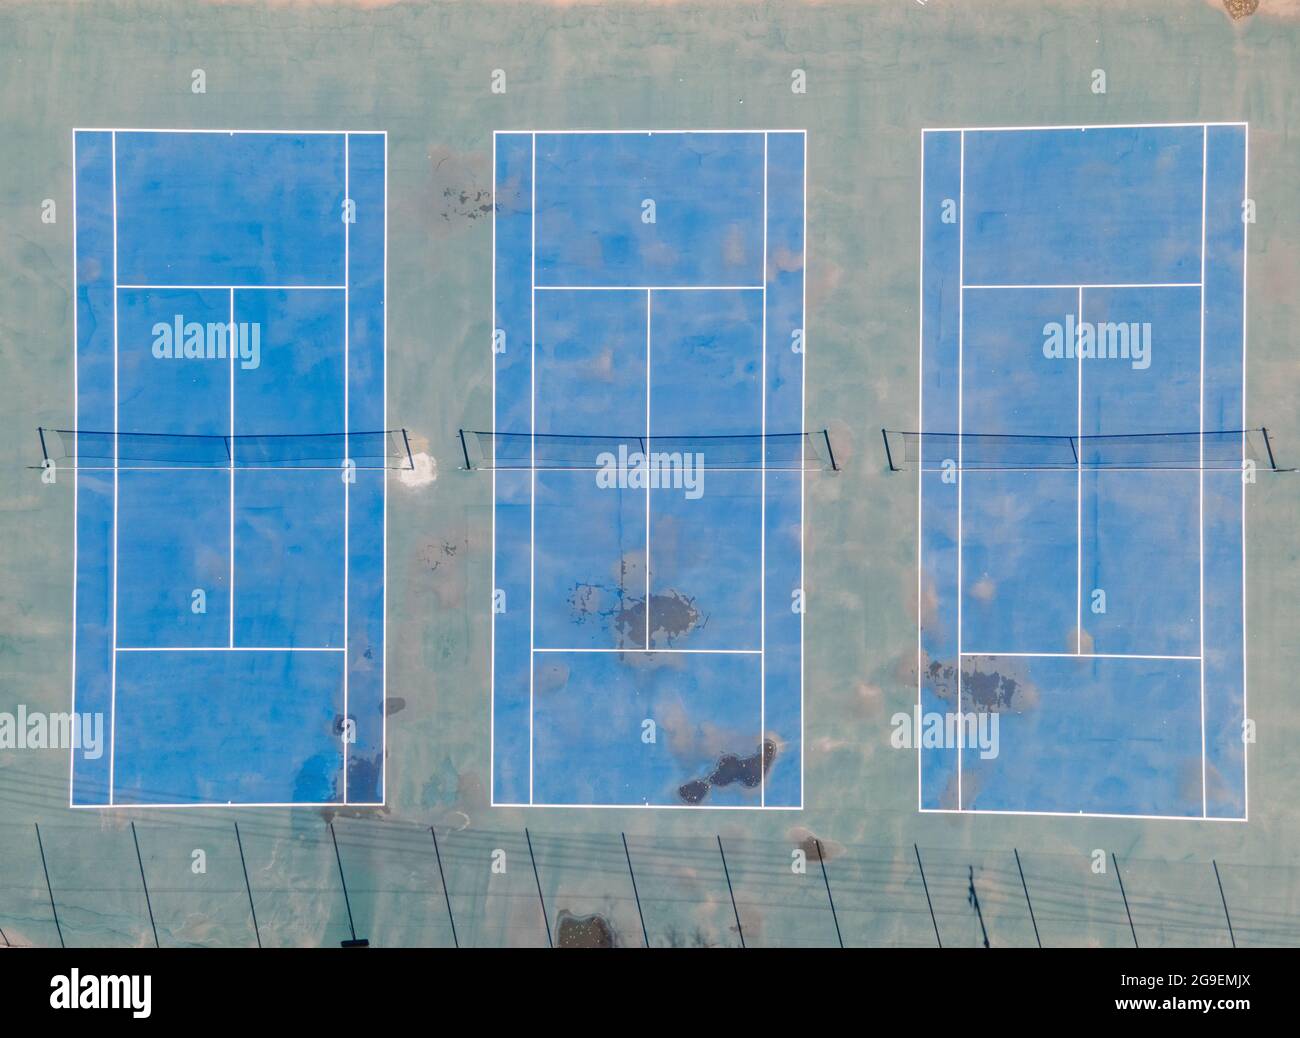 High angle view of tennis courts shot from drone Stock Photo